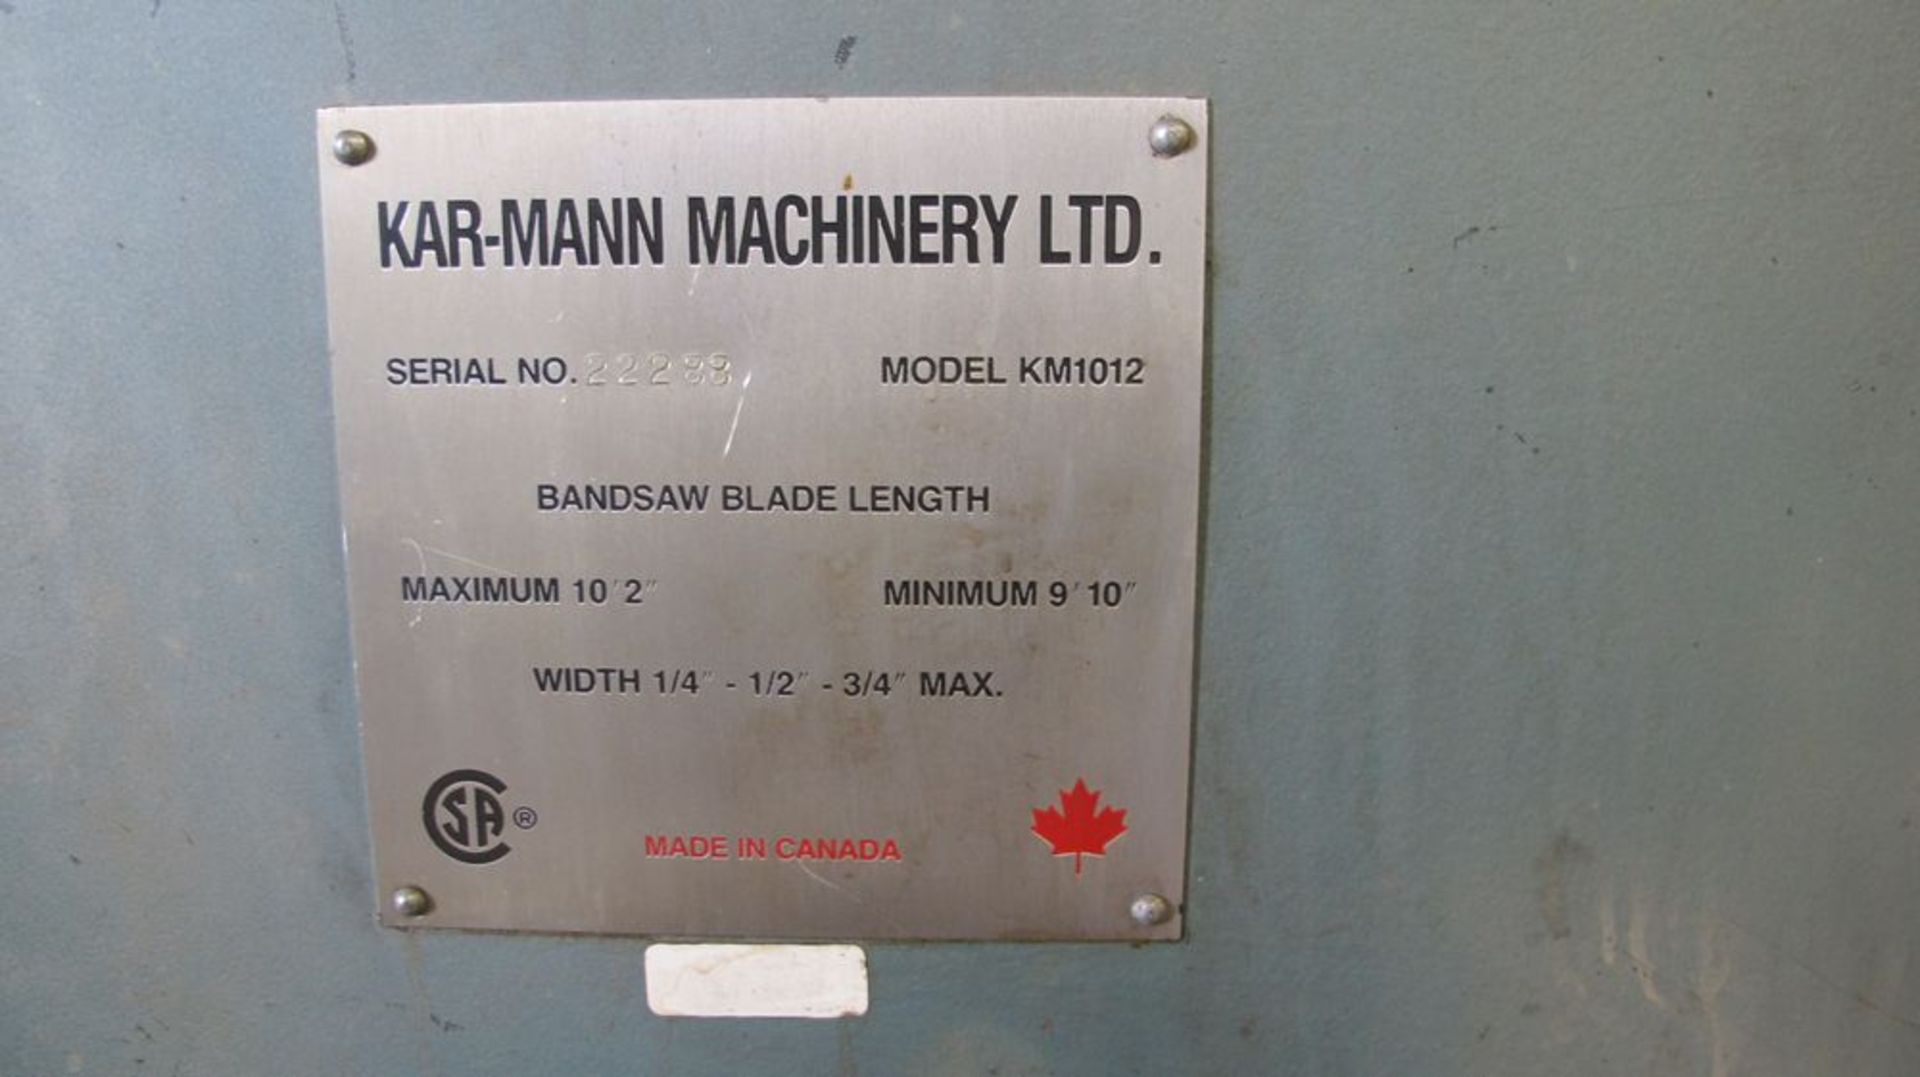 KARMAN KM1012 ROLL-IN BAND SAW, S/N 22288 W/EXTRA BLADES - Image 3 of 3